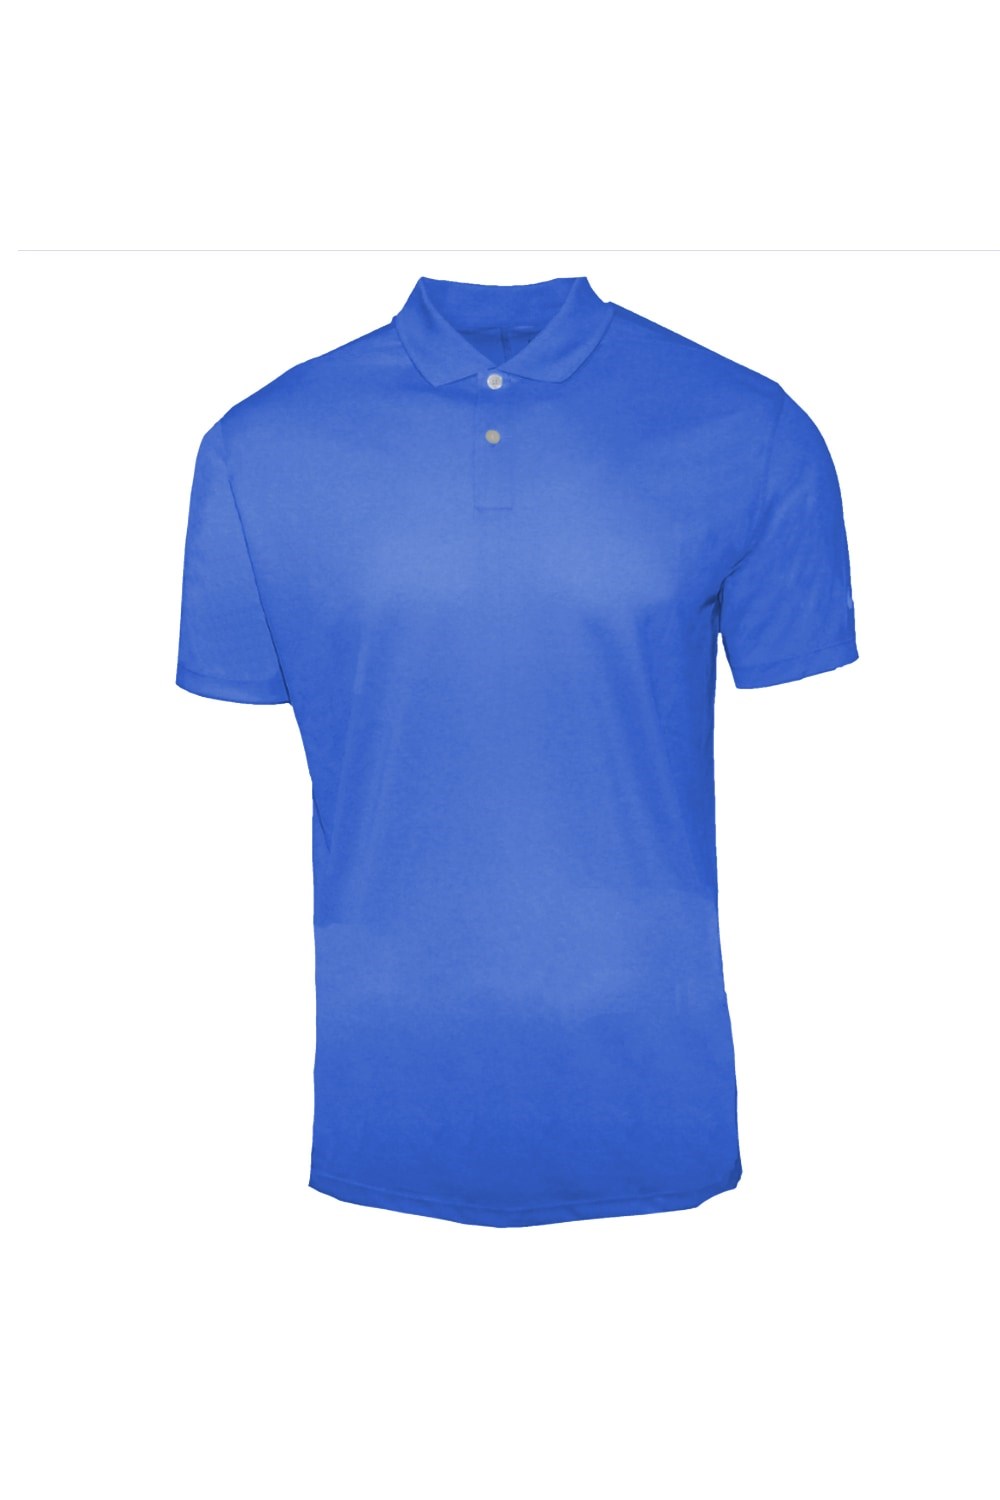 Solid Victory Mens Polo Shirt -